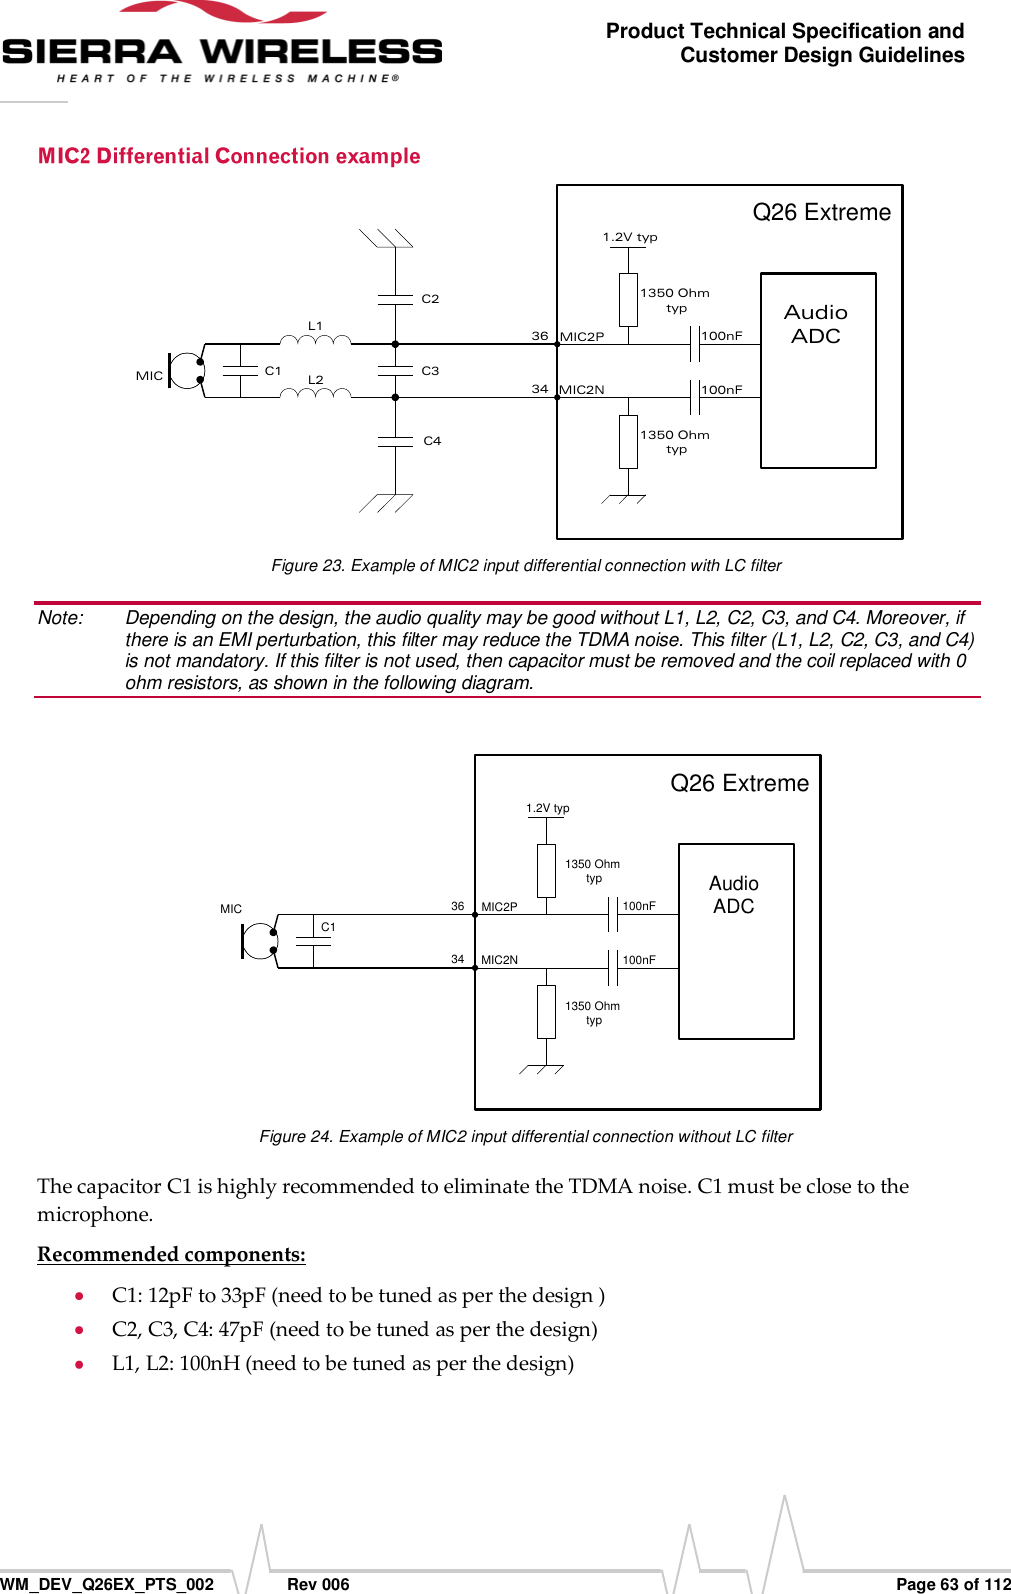      WM_DEV_Q26EX_PTS_002  Rev 006  Page 63 of 112 Product Technical Specification and Customer Design Guidelines C1MIC3634AudioADC1350 Ohm typ1350 Ohm typ1.2V typ100nF100nFMIC2PMIC2NC2C3C4L1L2Q26 Extreme Figure 23. Example of MIC2 input differential connection with LC filter Note:   Depending on the design, the audio quality may be good without L1, L2, C2, C3, and C4. Moreover, if there is an EMI perturbation, this filter may reduce the TDMA noise. This filter (L1, L2, C2, C3, and C4) is not mandatory. If this filter is not used, then capacitor must be removed and the coil replaced with 0 ohm resistors, as shown in the following diagram.   C1MIC 3634AudioADC1350 Ohm typ1350 Ohm typ1.2V typ100nF100nFMIC2PMIC2NQ26 Extreme Figure 24. Example of MIC2 input differential connection without LC filter The capacitor C1 is highly recommended to eliminate the TDMA noise. C1 must be close to the microphone. Recommended components:  C1: 12pF to 33pF (need to be tuned as per the design )  C2, C3, C4: 47pF (need to be tuned as per the design)  L1, L2: 100nH (need to be tuned as per the design) 